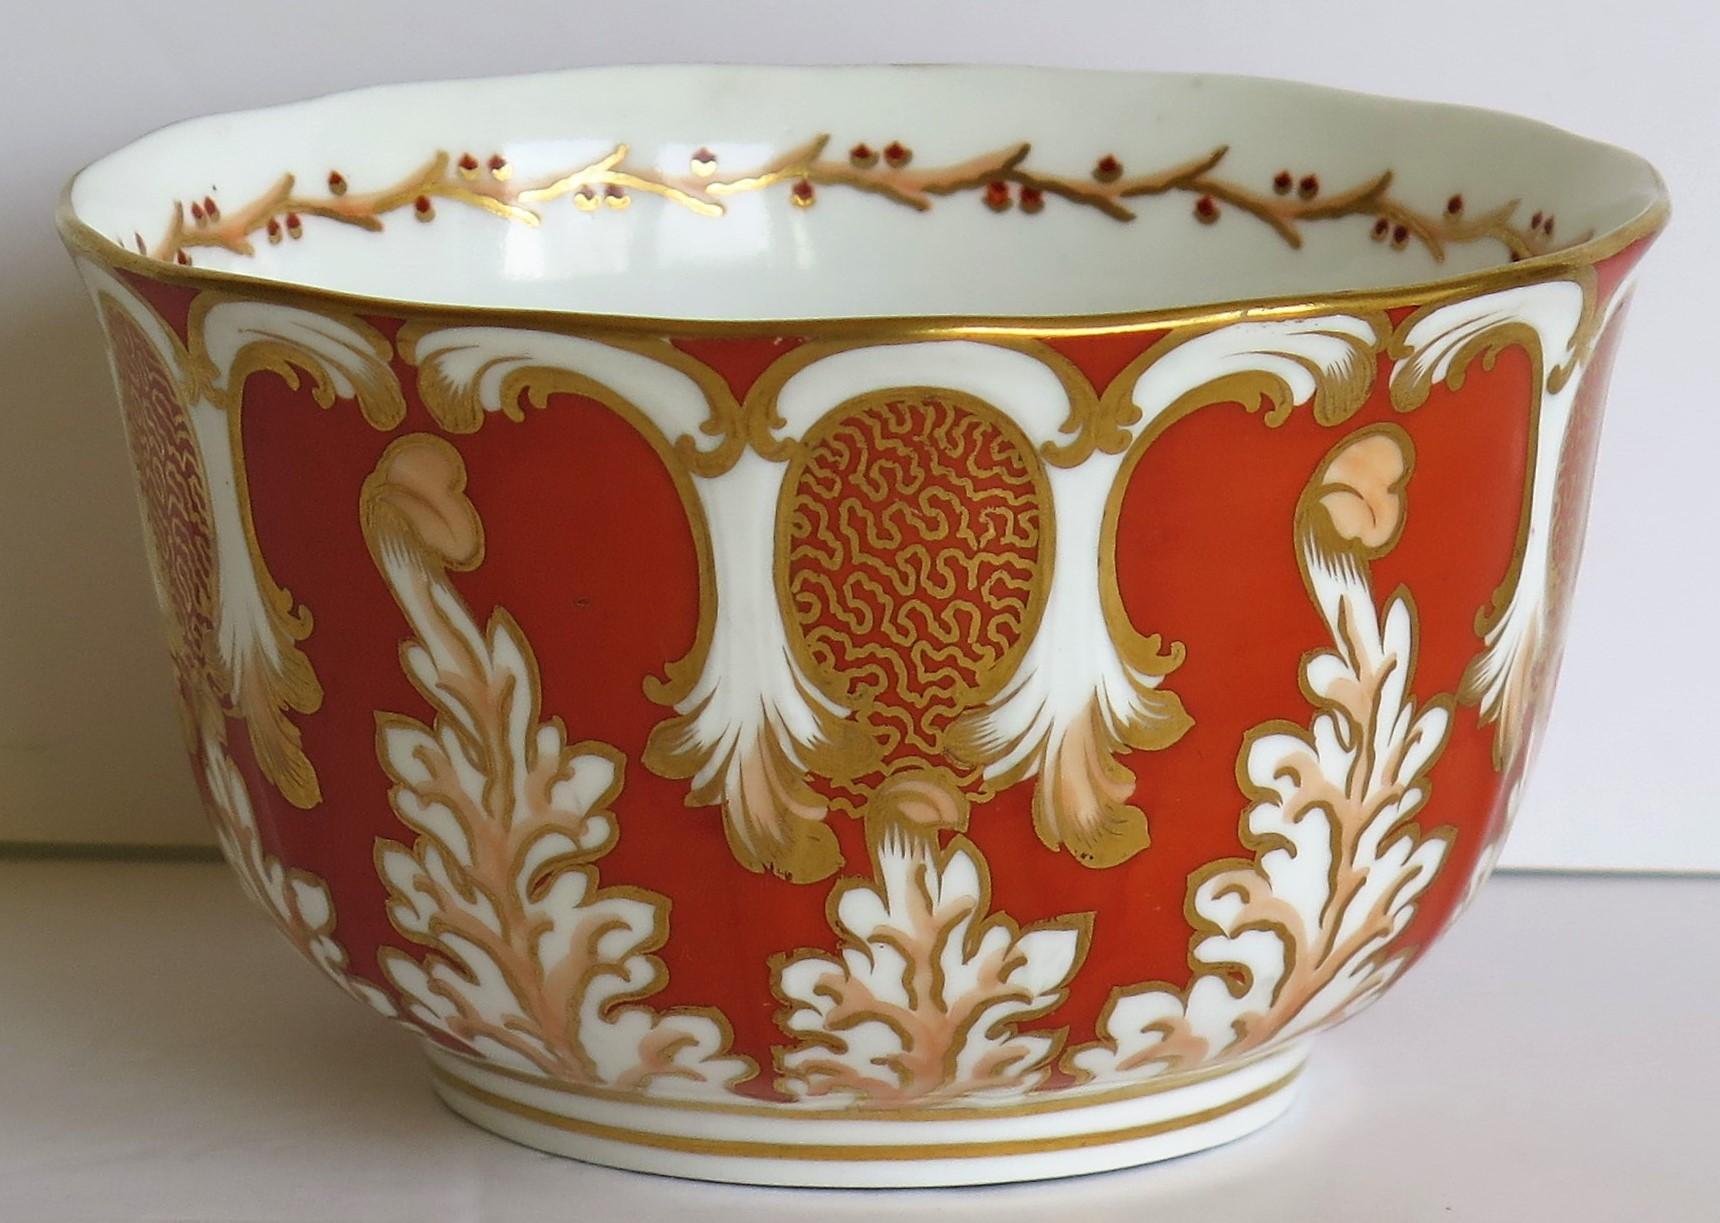 Davenport Porcelain Bowl in Pattern 2144 Fully Marked to Base, English, 1845 3